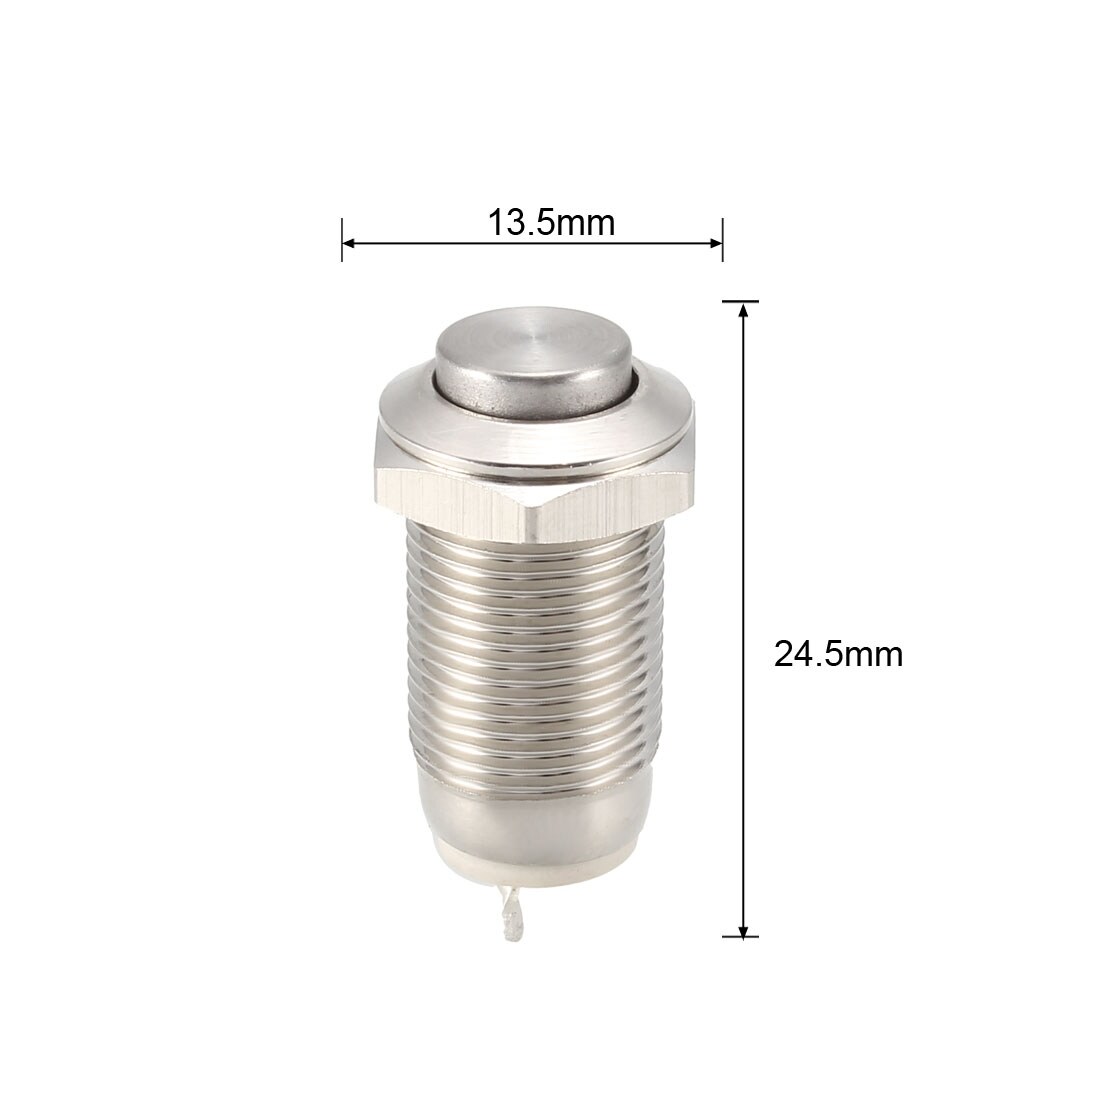 Latching Metal Push Button Switch 10mm Mounting Dia 1NO 250V 5A - Silver Tone